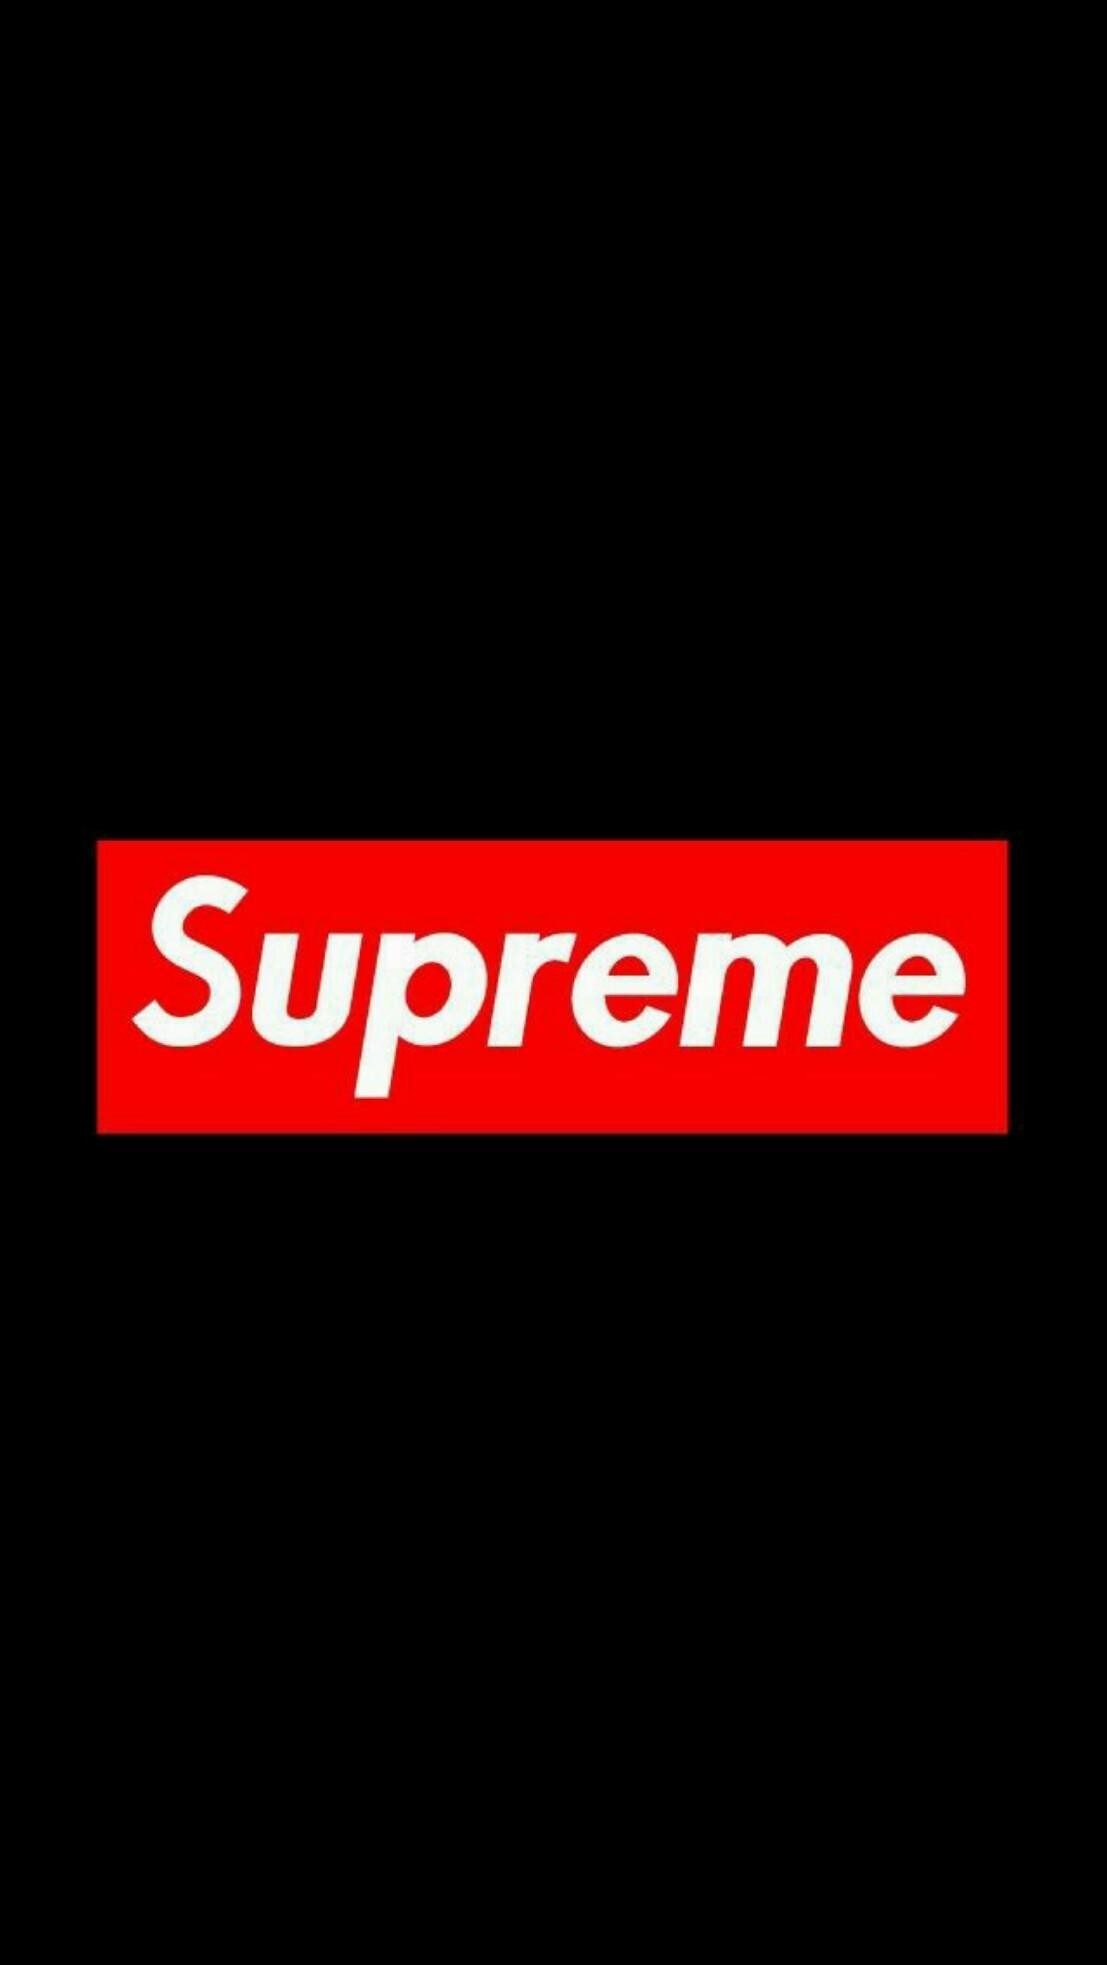 Supreme black iPhone android wallpaper wp2001492